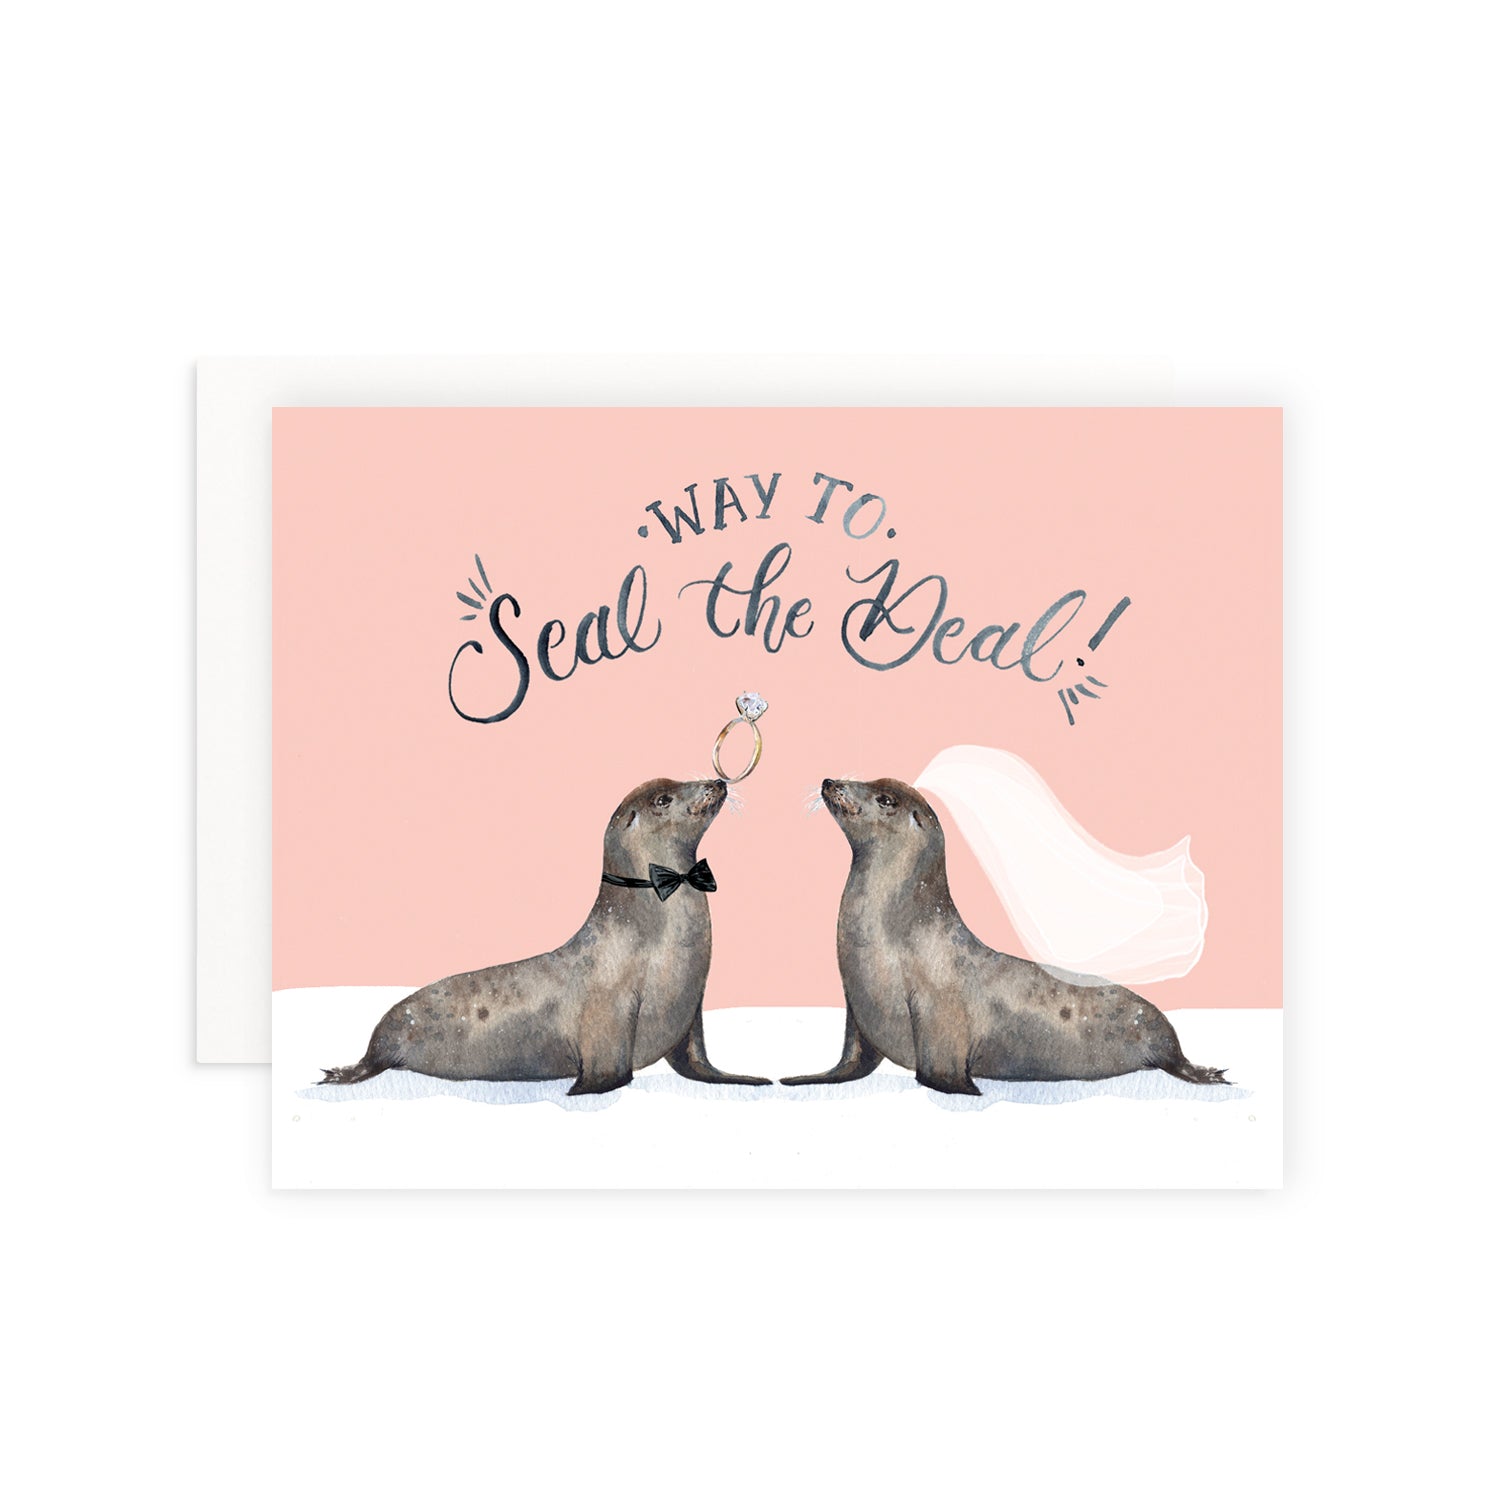 Way to Seal the Deal Greeting Card